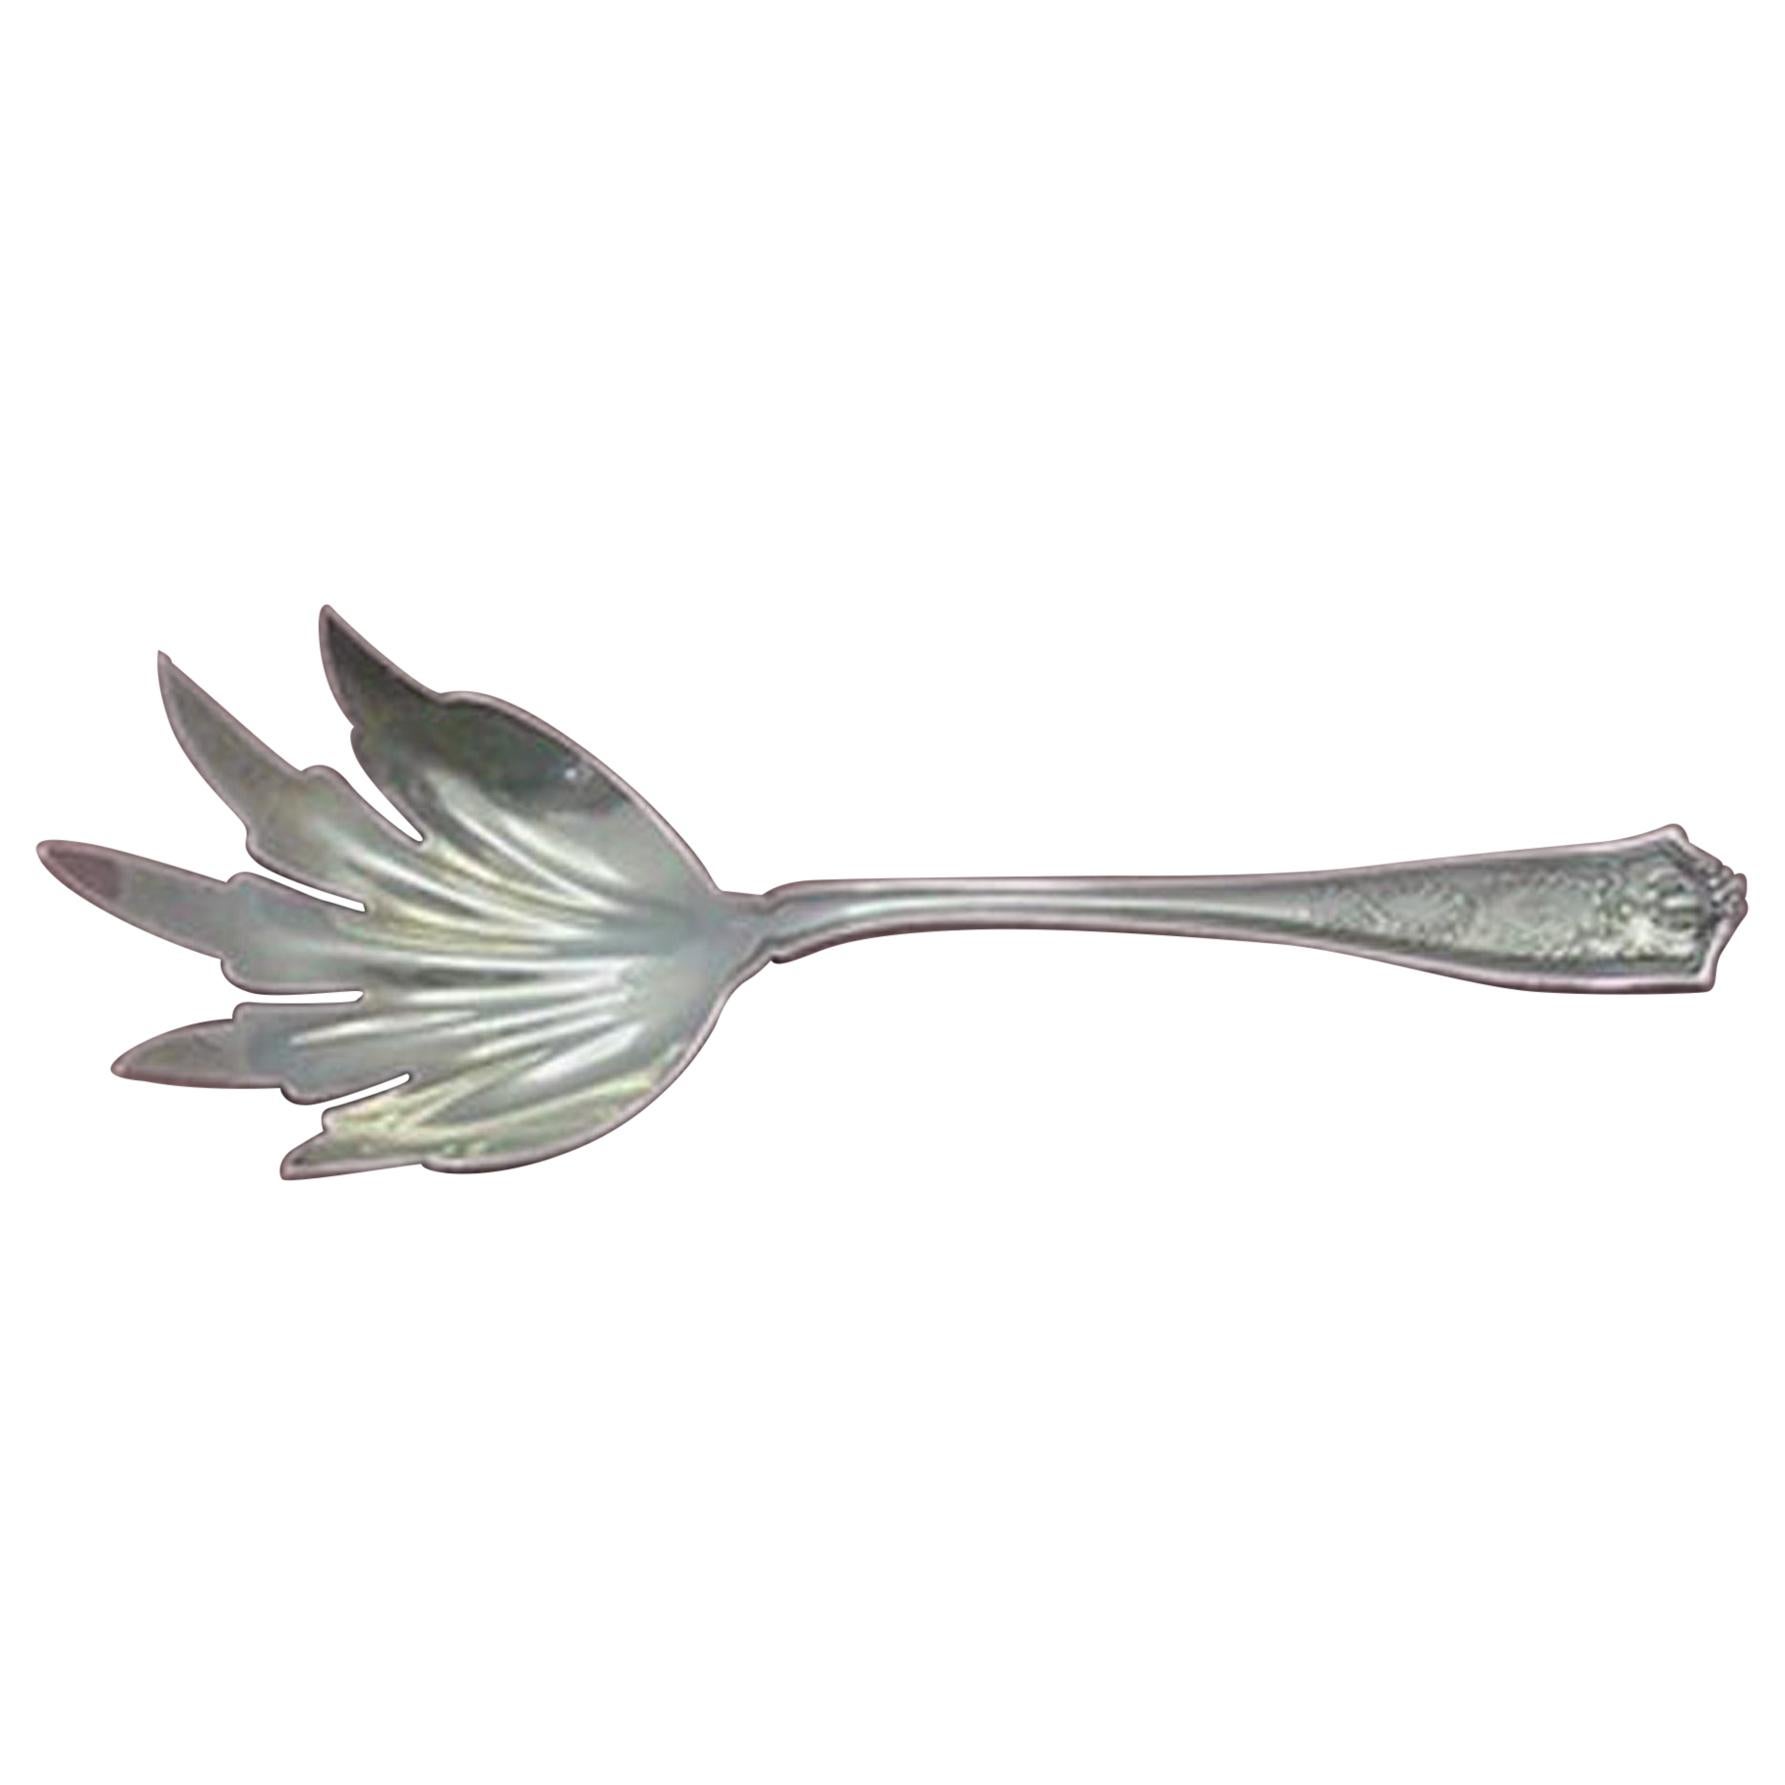 Winthrop by Tiffany & Co. Sterling Silver Macaroni Fork 5-Tine